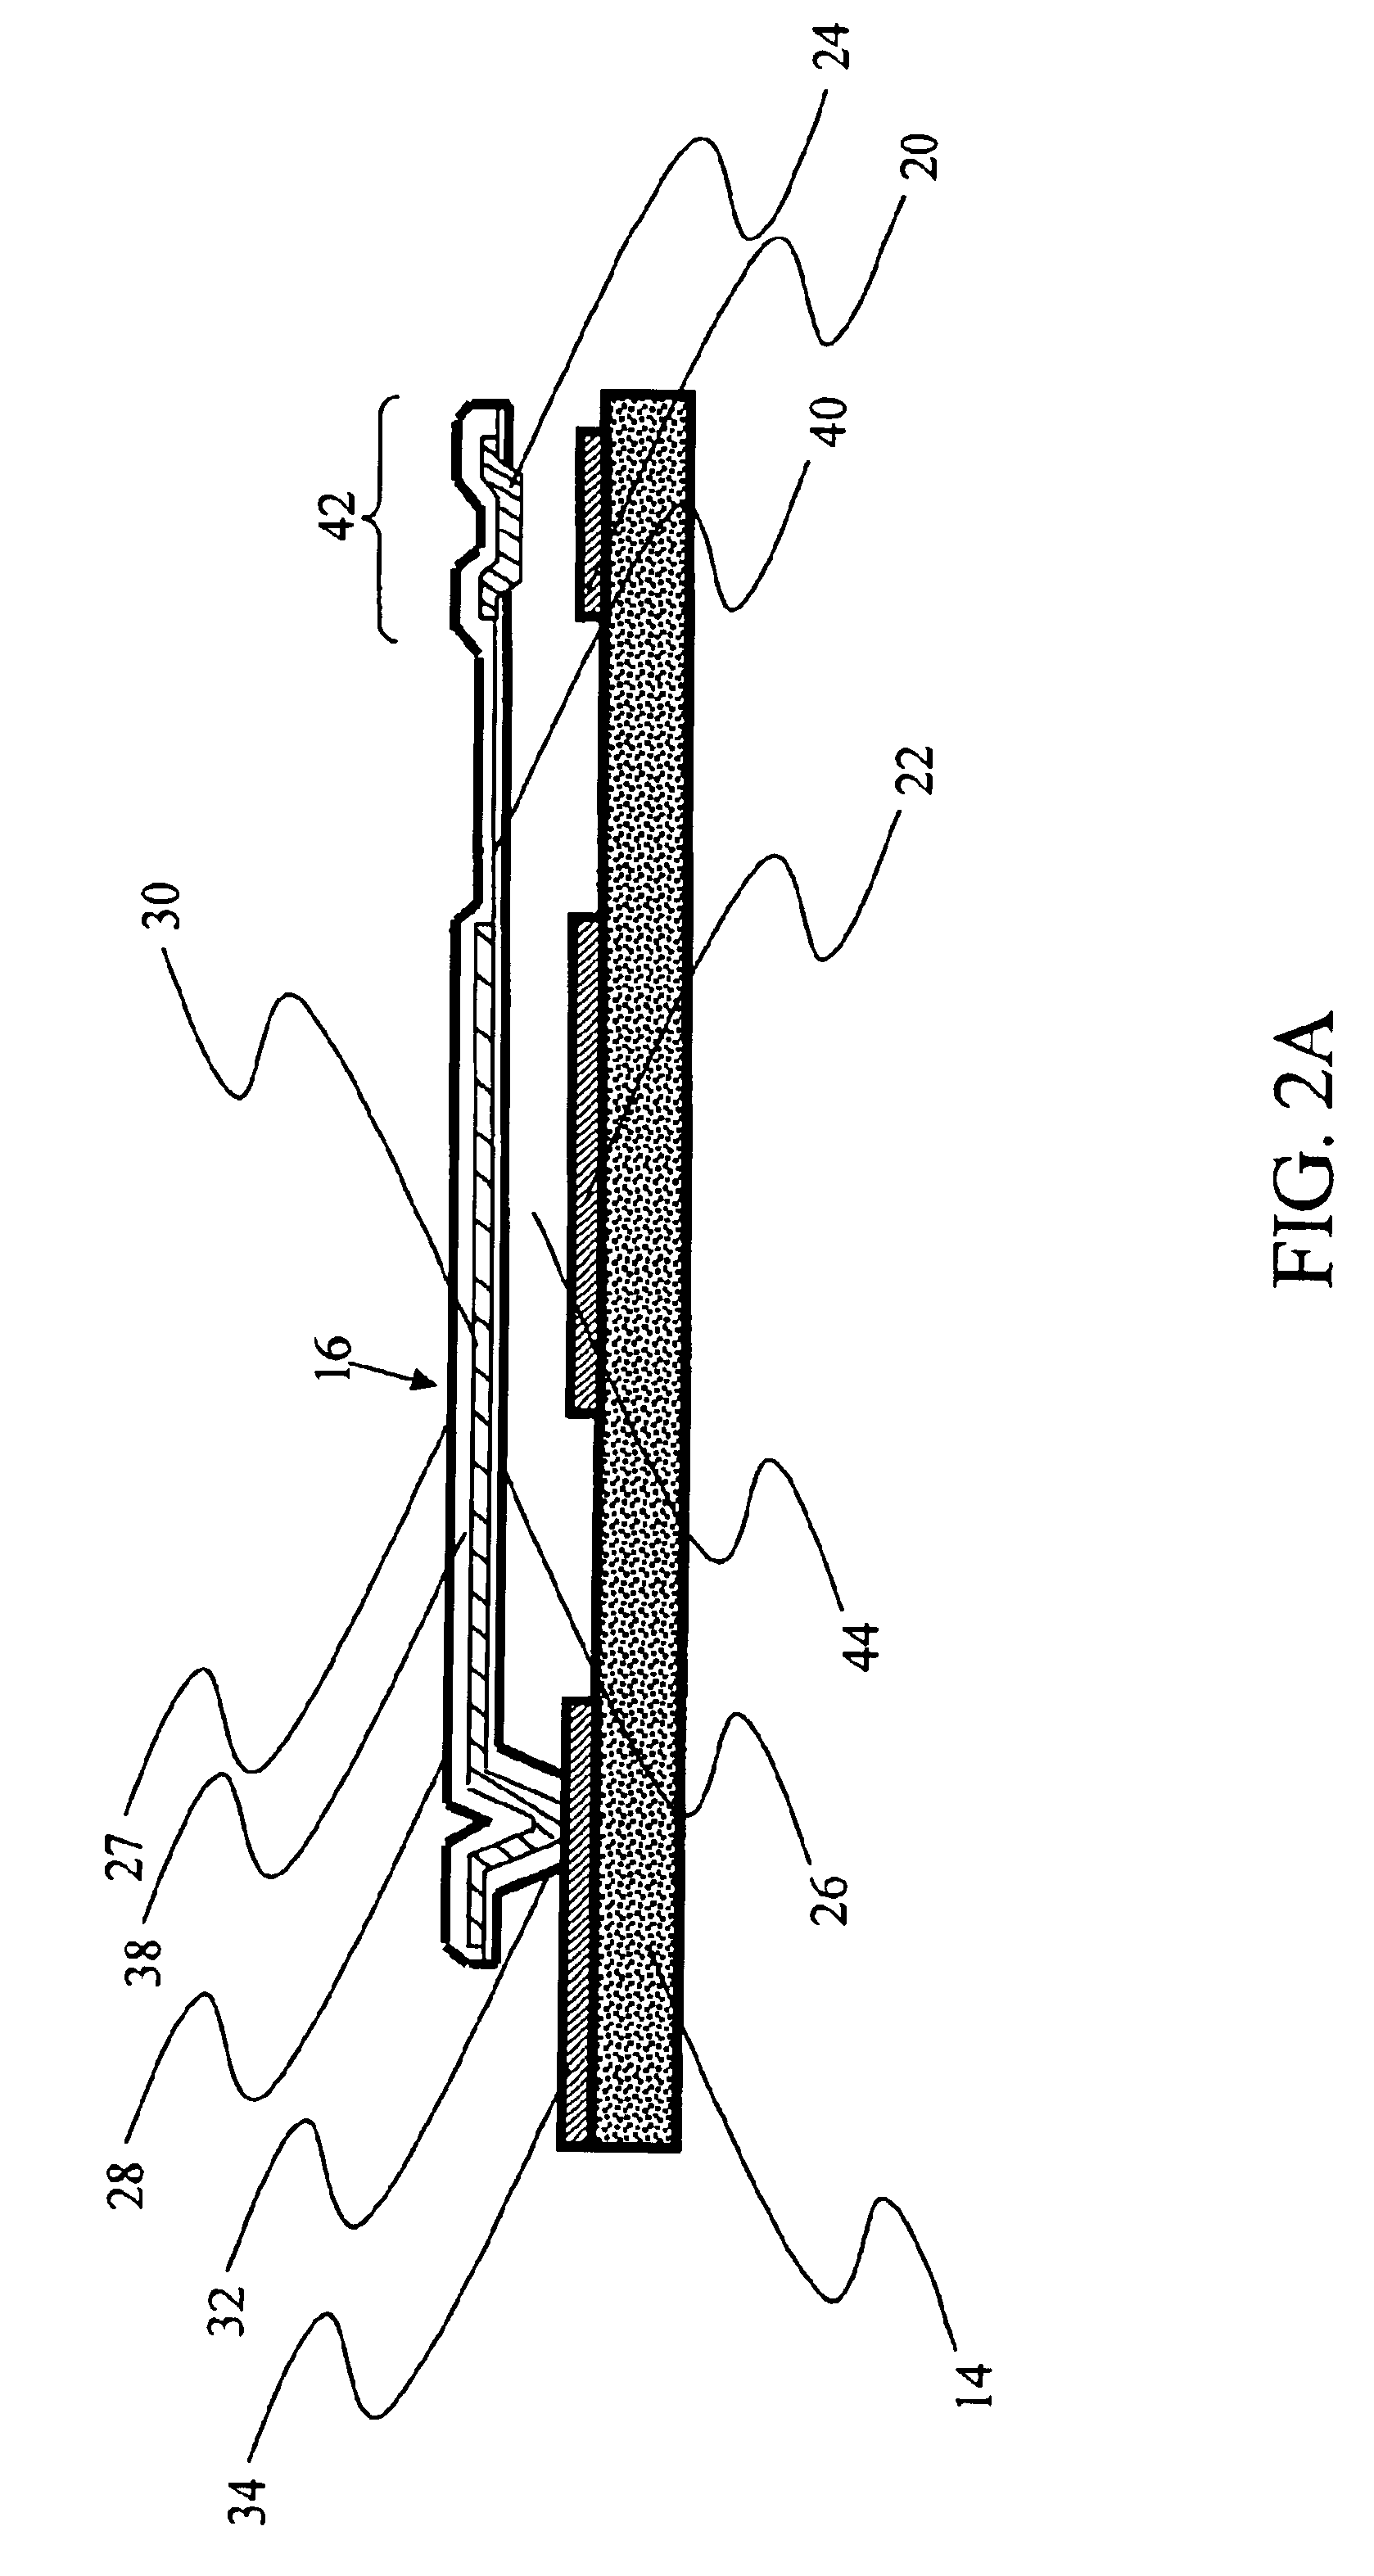 Torsion spring for electro-mechanical switches and a cantilever-type RF micro-electromechanical switch incorporating the torsion spring